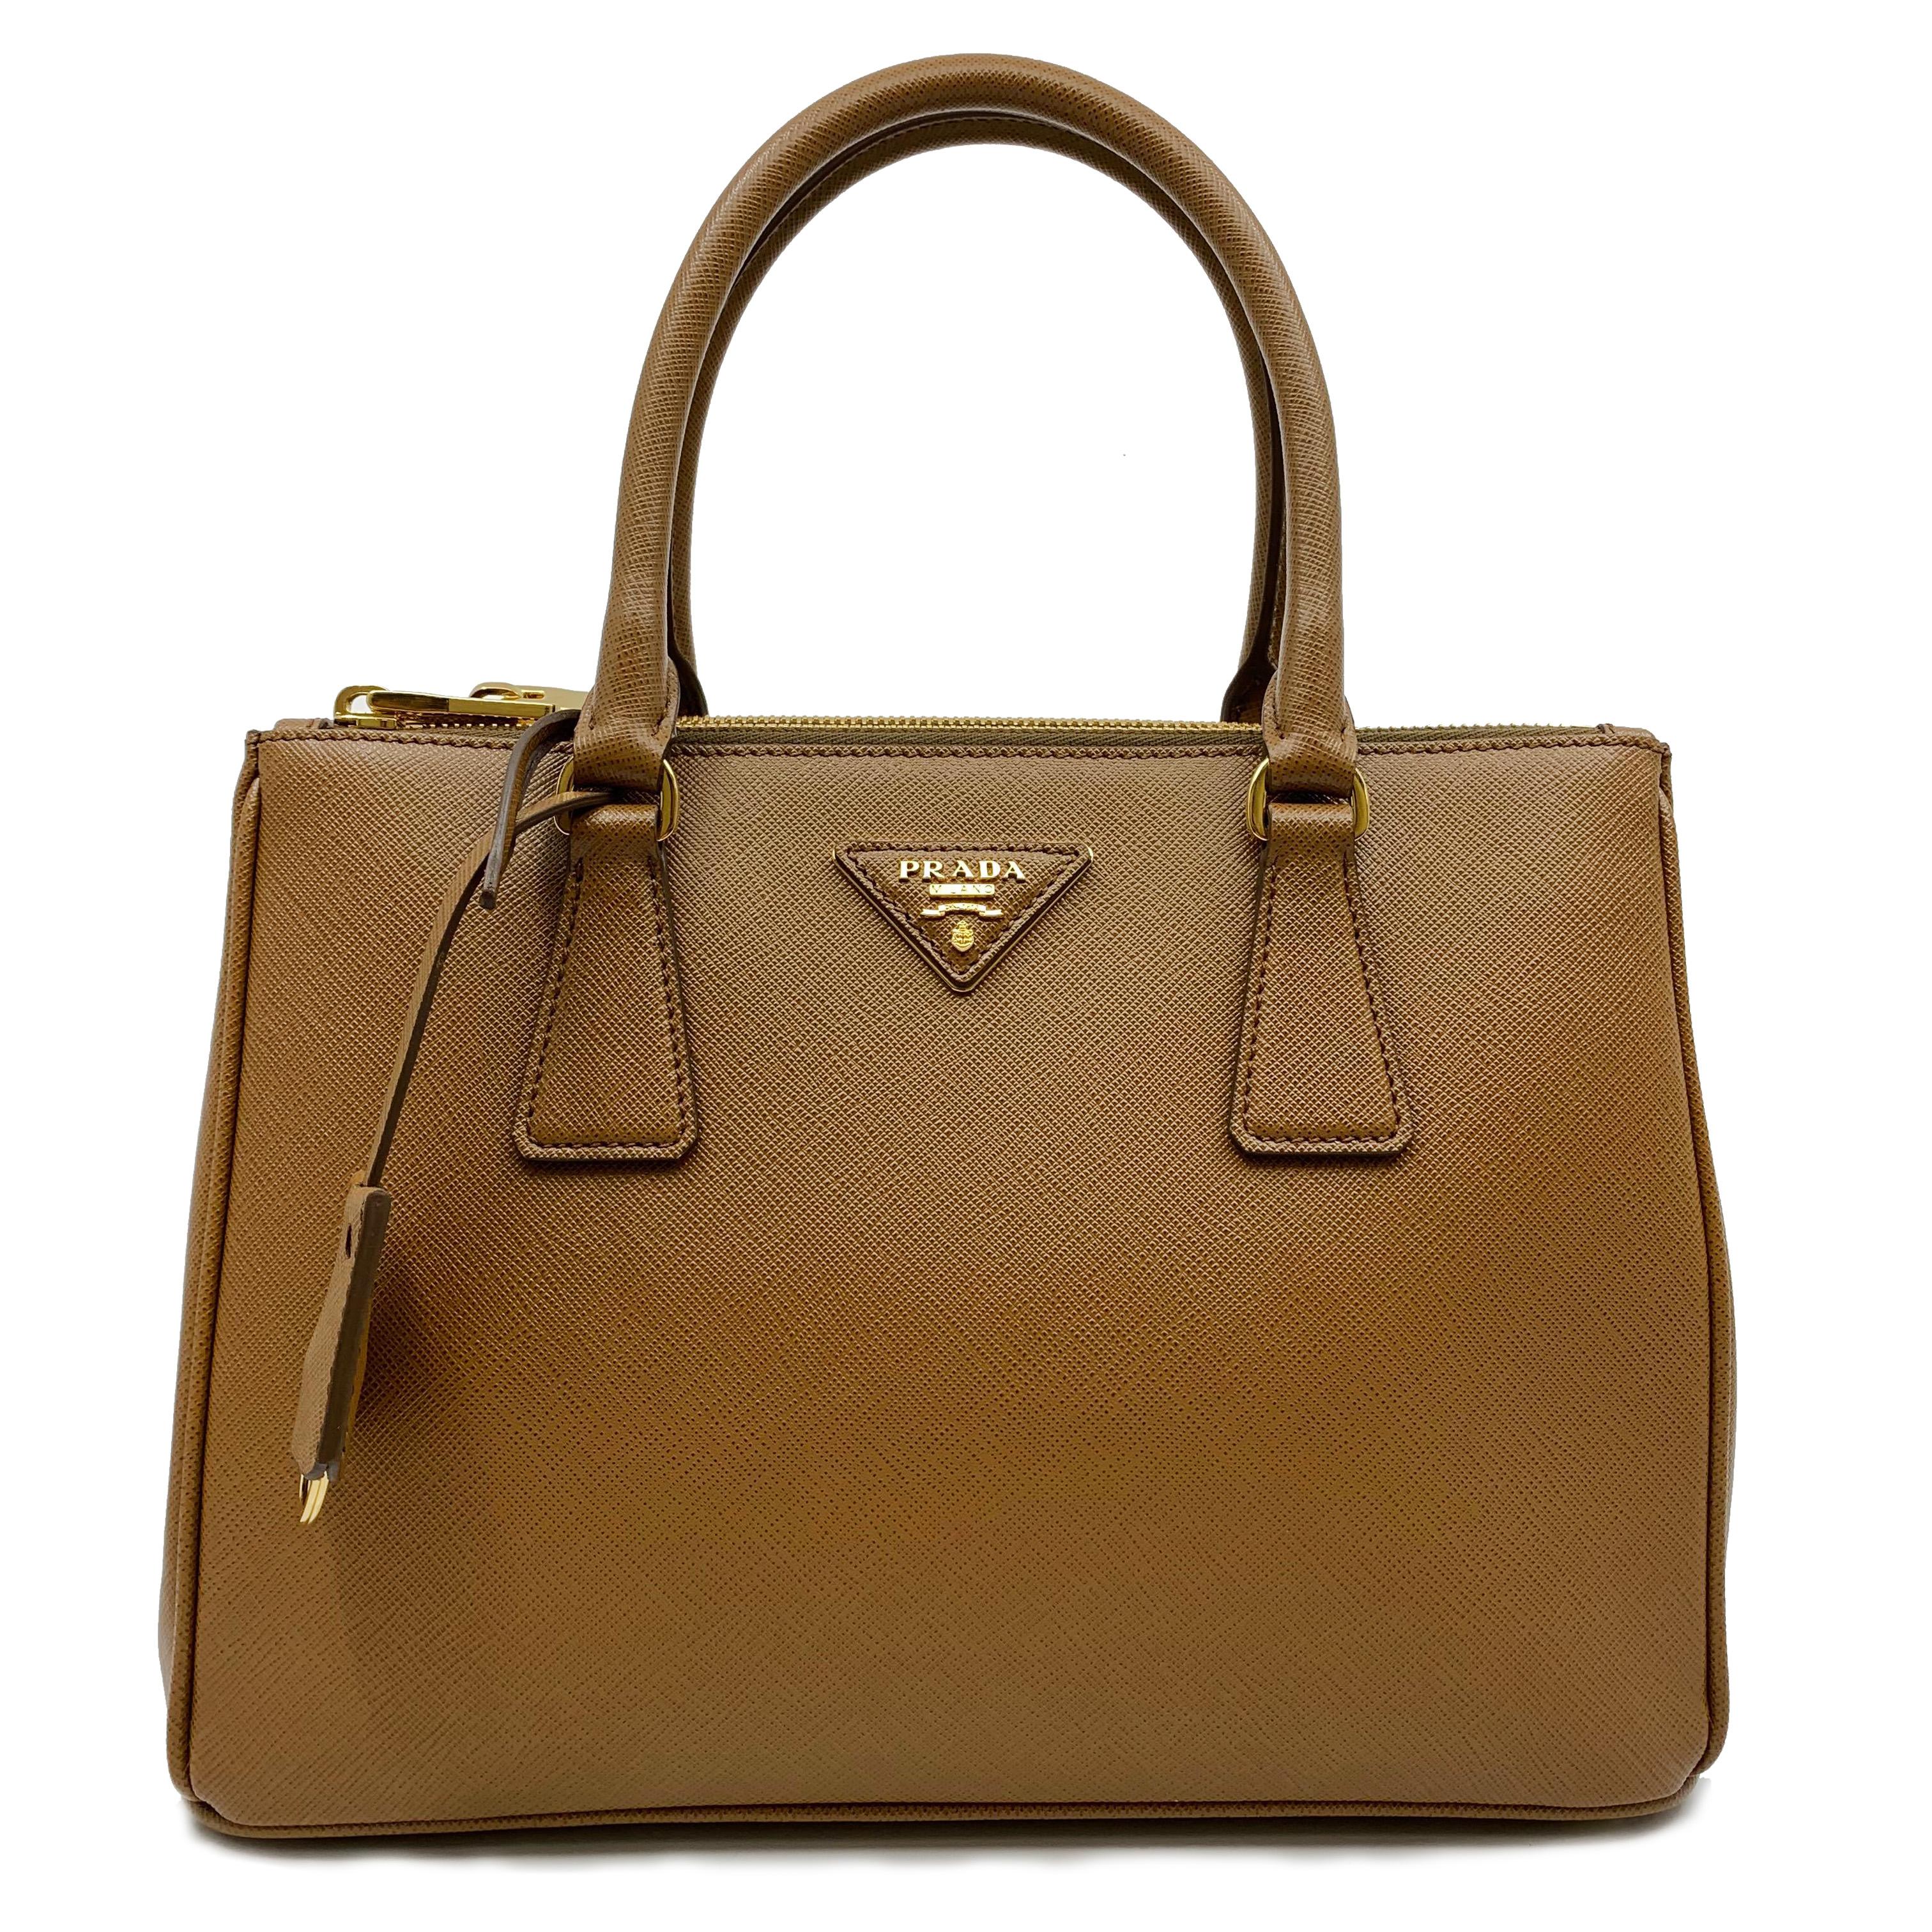 Prada's Saffiano luxe tote is a perfectly prim addition to your accessories edit. Crafted from textured brown calf leather, this design is finished with dainty top handles and golden hardware. Comes without Dust Bag. Authenticity Card is included.